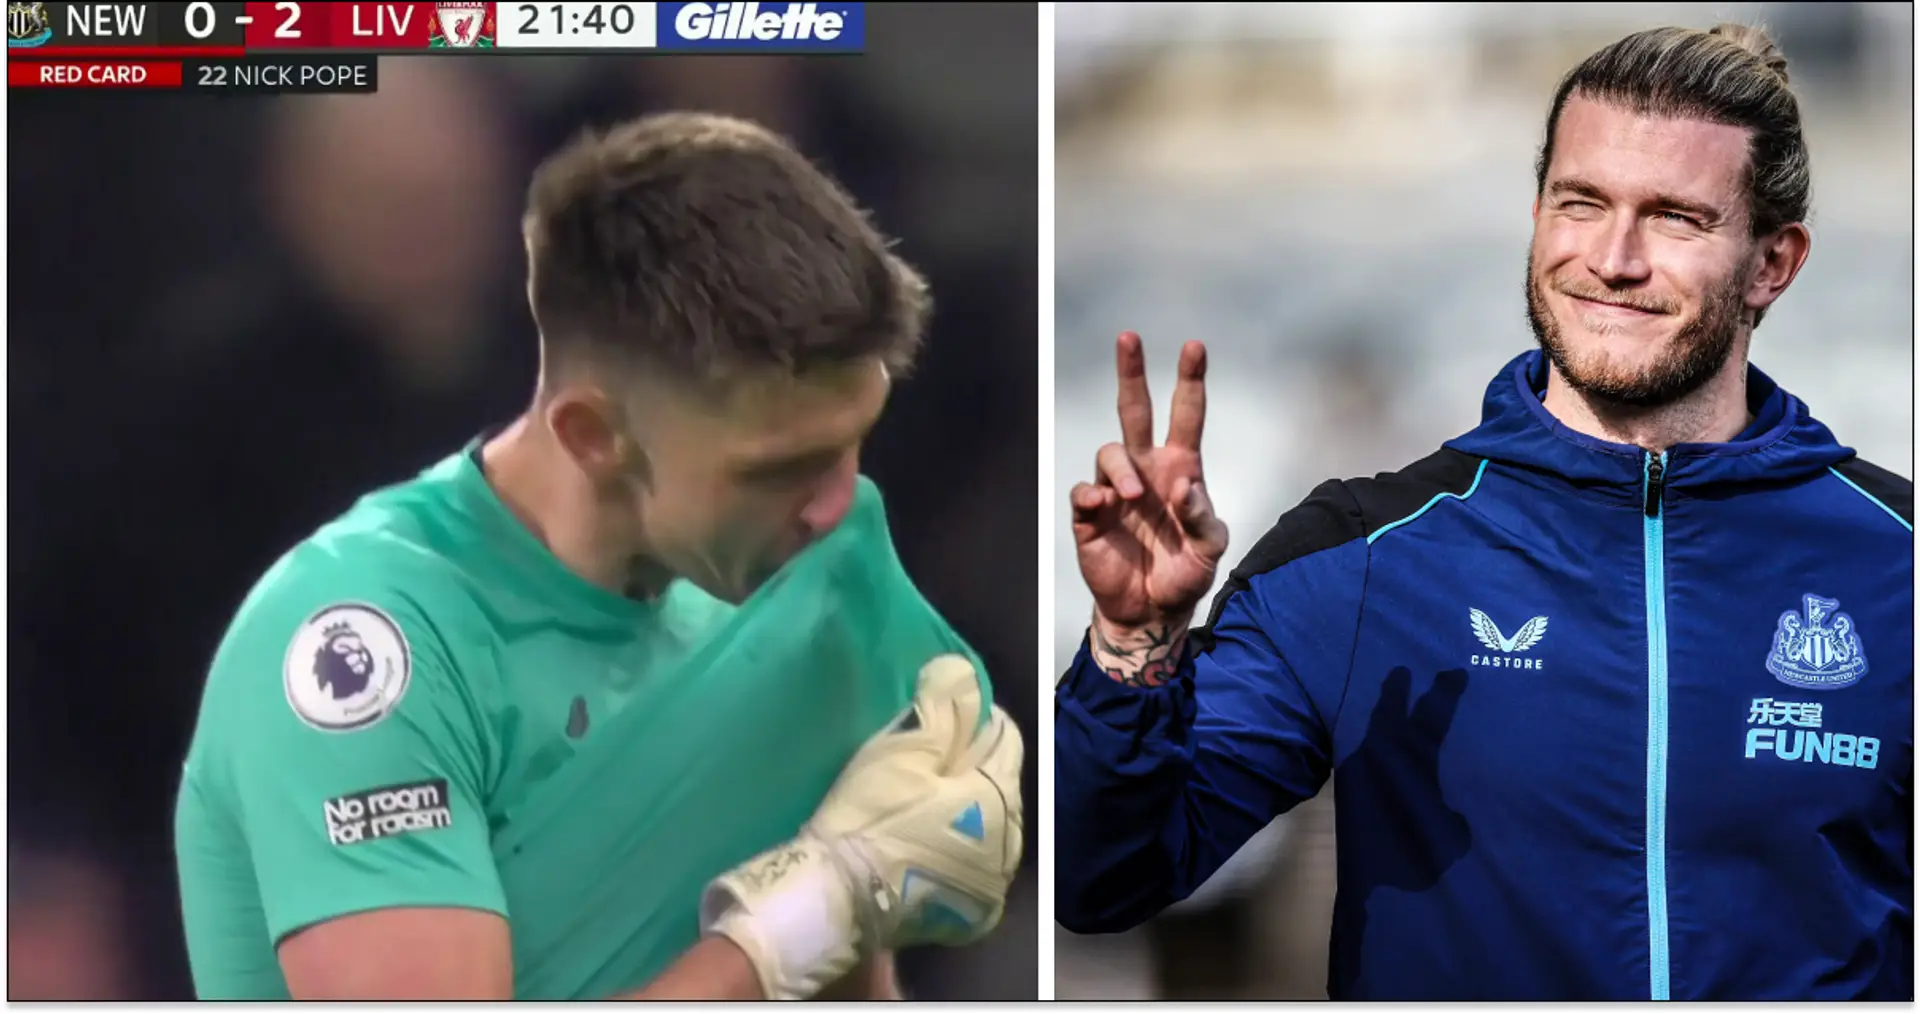 Loris Karius set to play v United in League Cup final after Nick Pope's red card v Liverpool